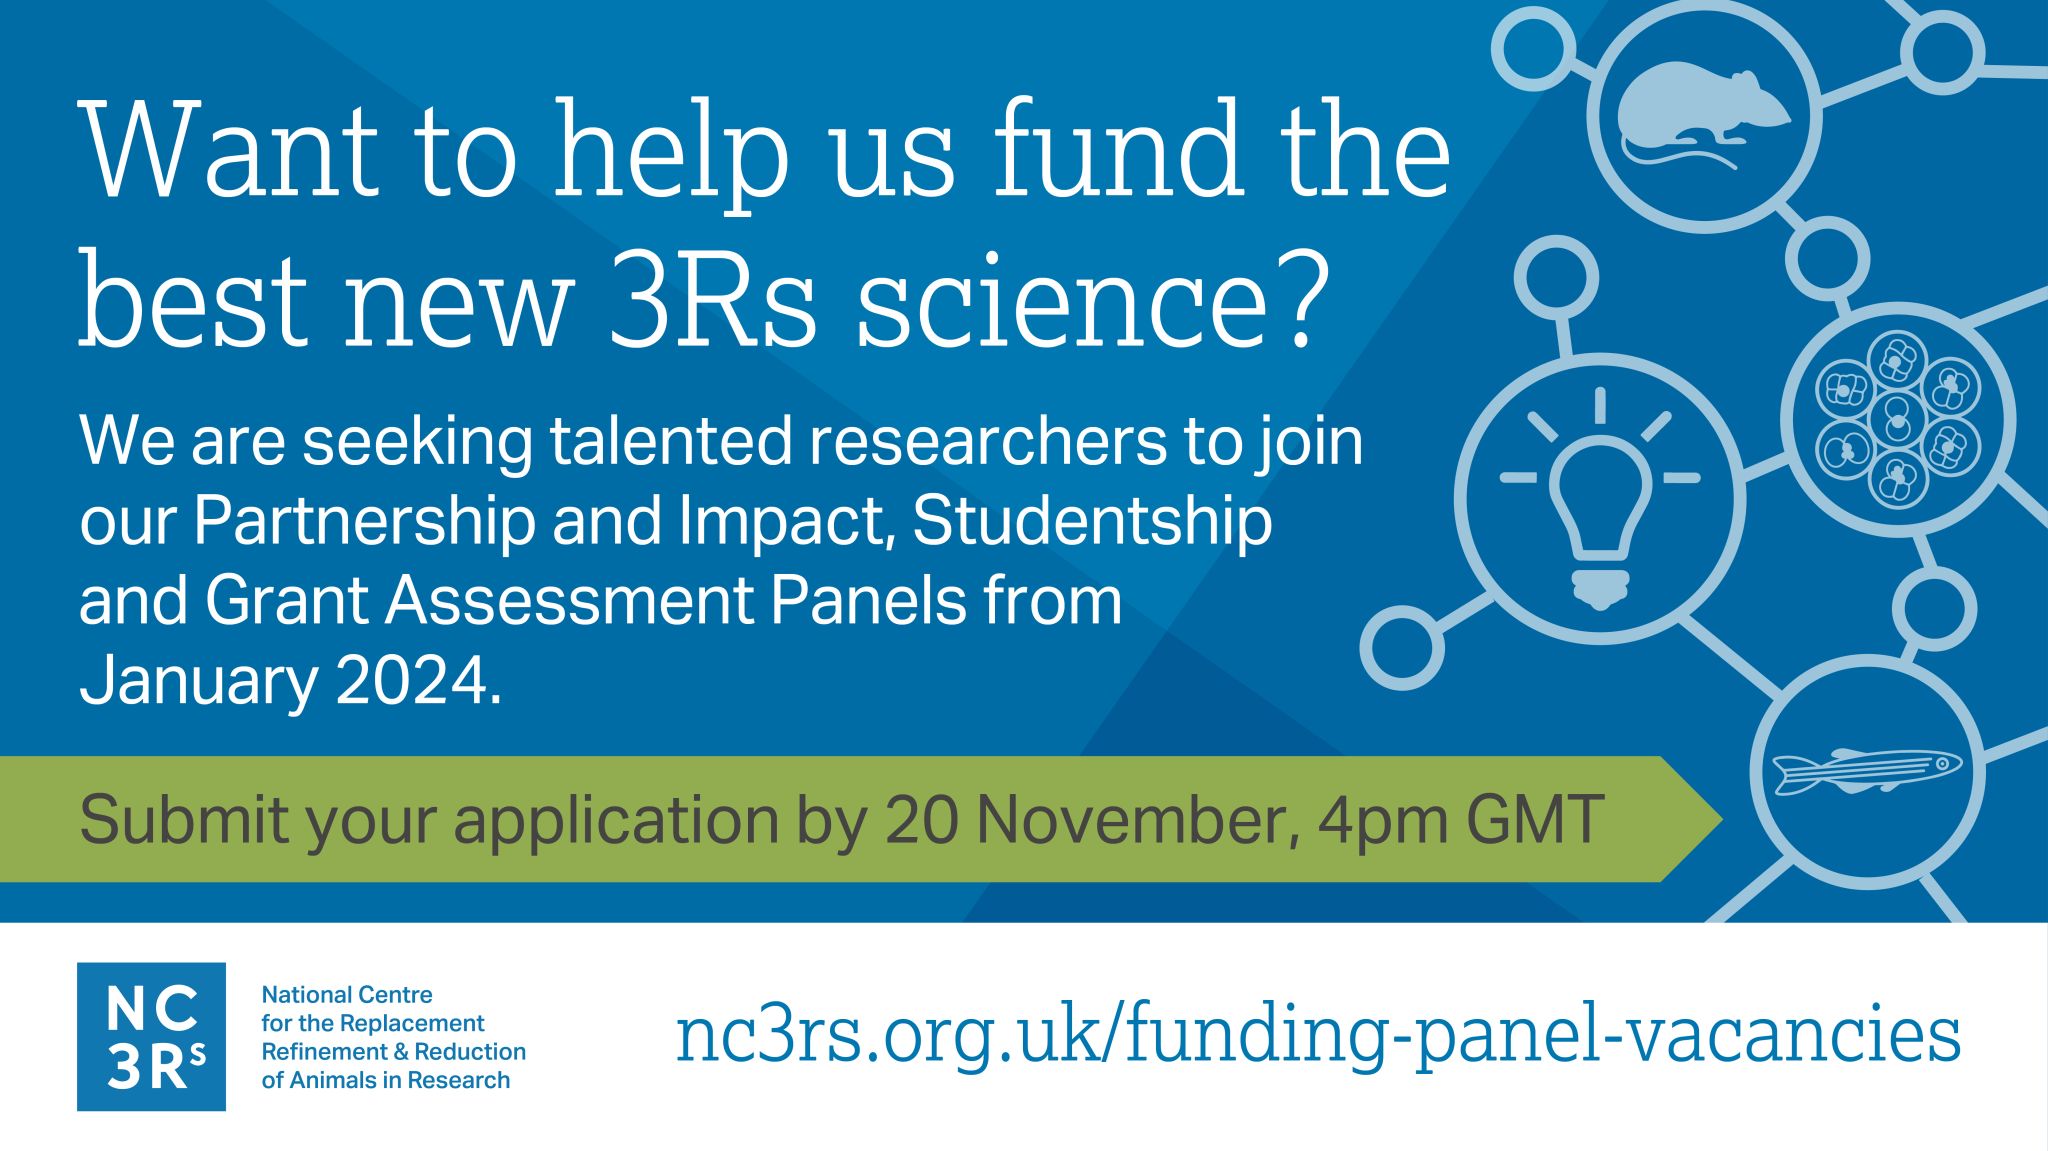 Want to help us fund the best new 3Rs science? We are seeking talented researchers to join our Partnership and Impact, Studentship and Grant Assessment Panels from January 2024. Submit your application by 20 November, 4pm GMT.